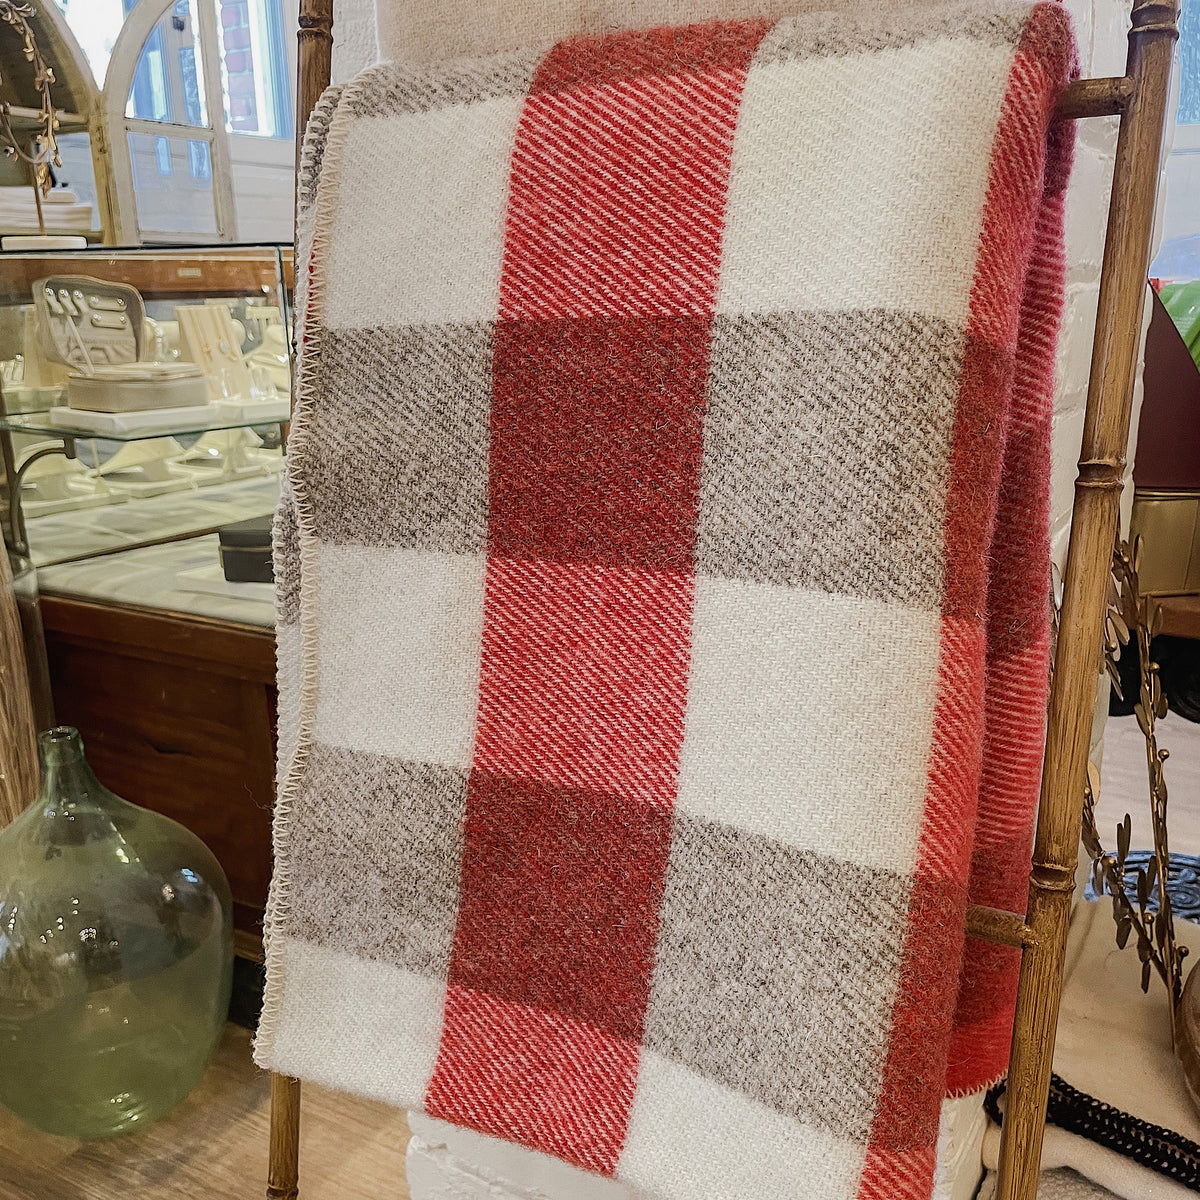 MacAusland Throw Blanket, Red Check